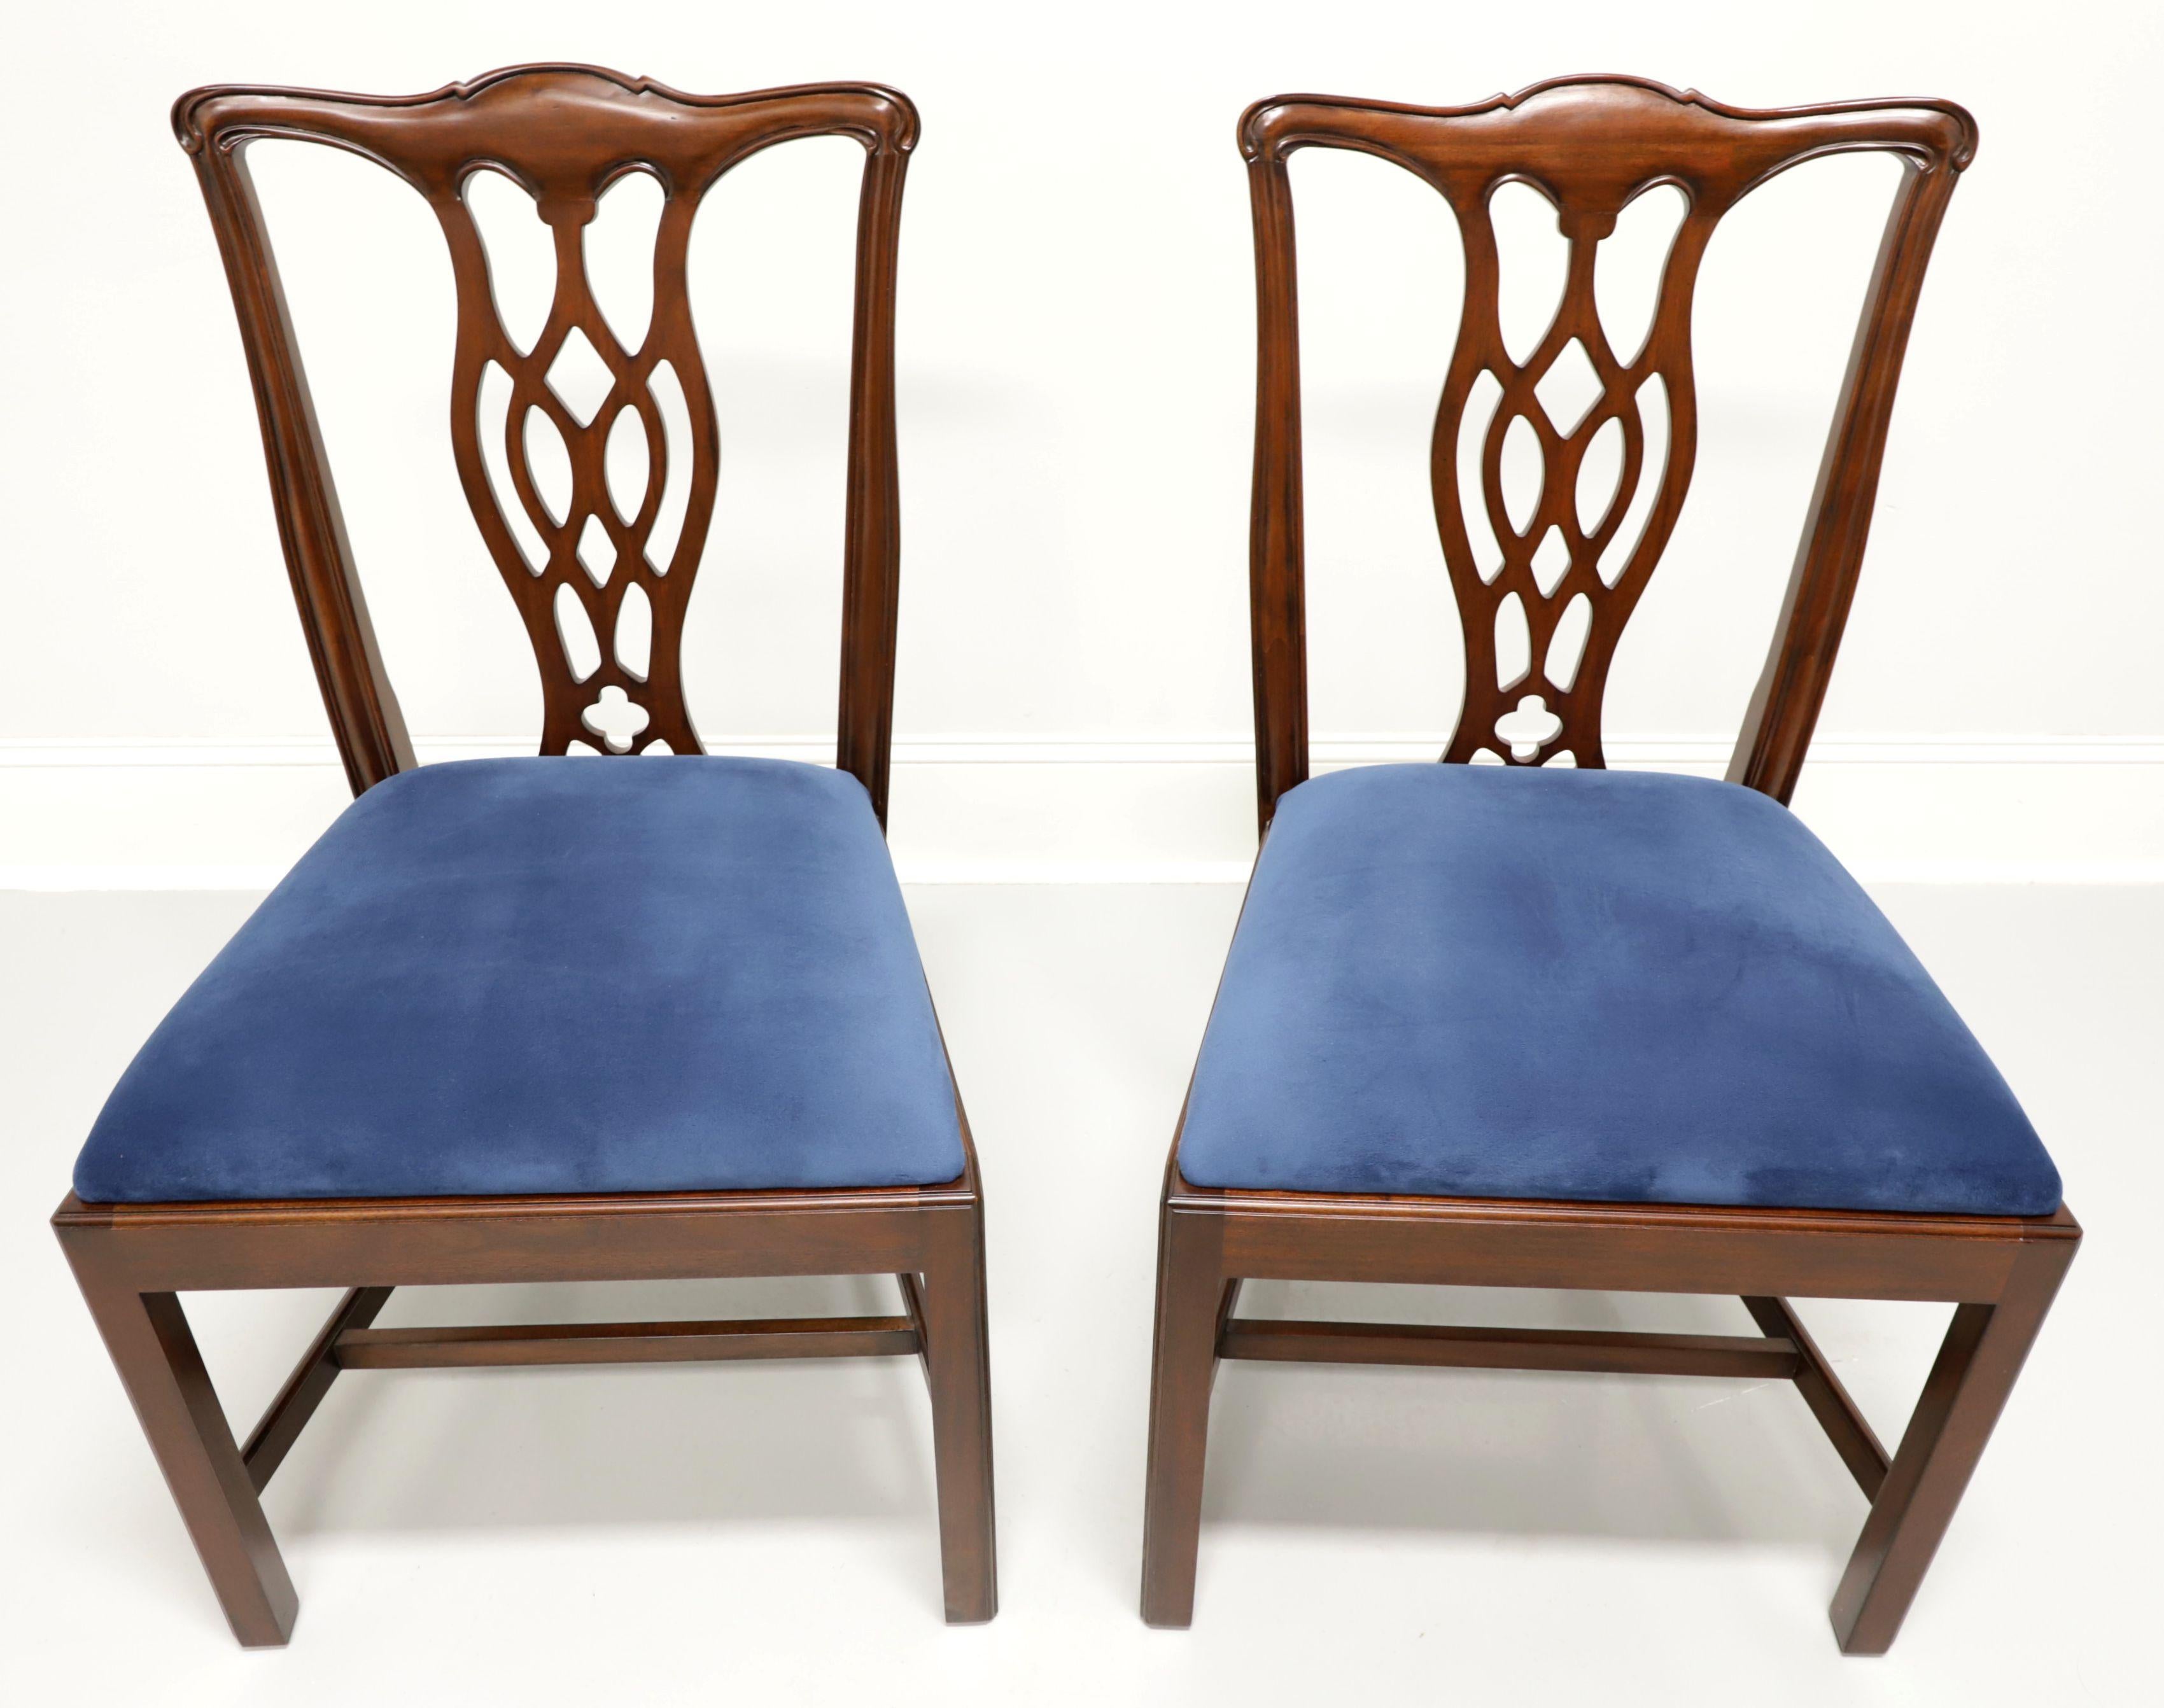 A pair of dining side chairs in the Chippendale style by Hickory Chair Company. Solid mahogany with carved crestrail, carved seat back, blue color crushed velvet upholstered seat, straight legs and stretchers. Made in North Carolina, USA, in the